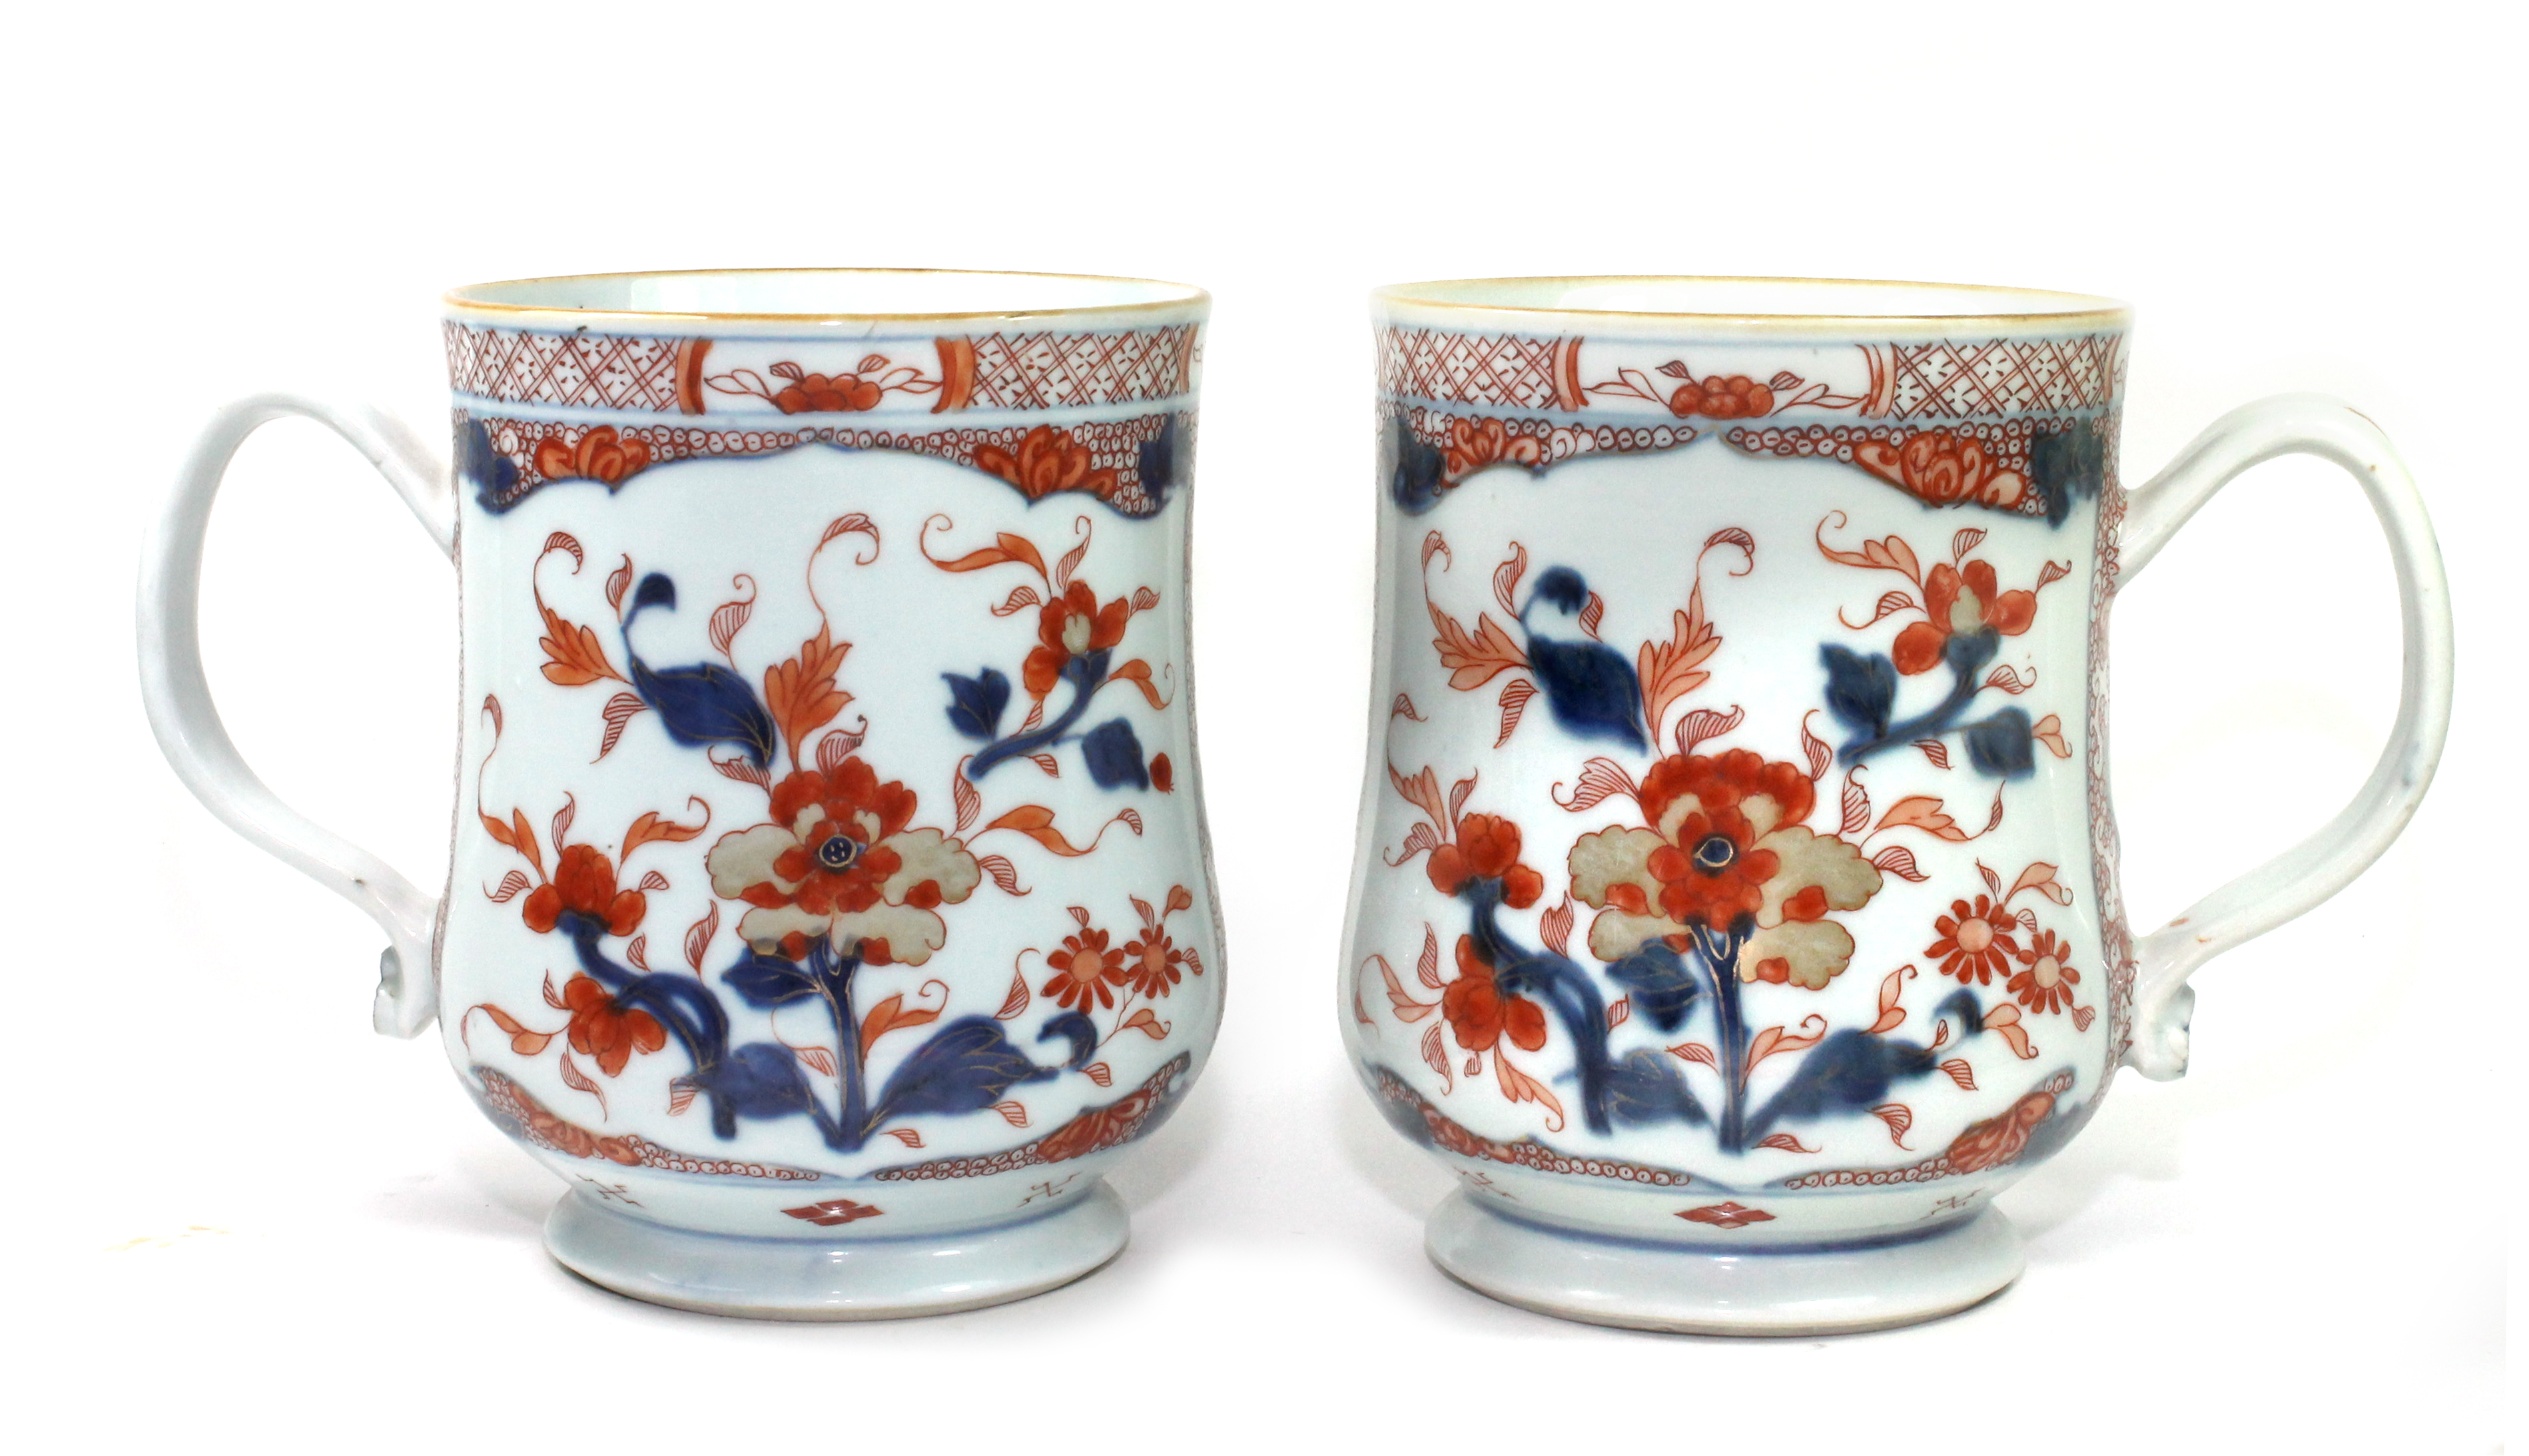 A pair of Chinese Imari baluster tankards, circa 1720-50, painted in underglaze-blue, iron-red and